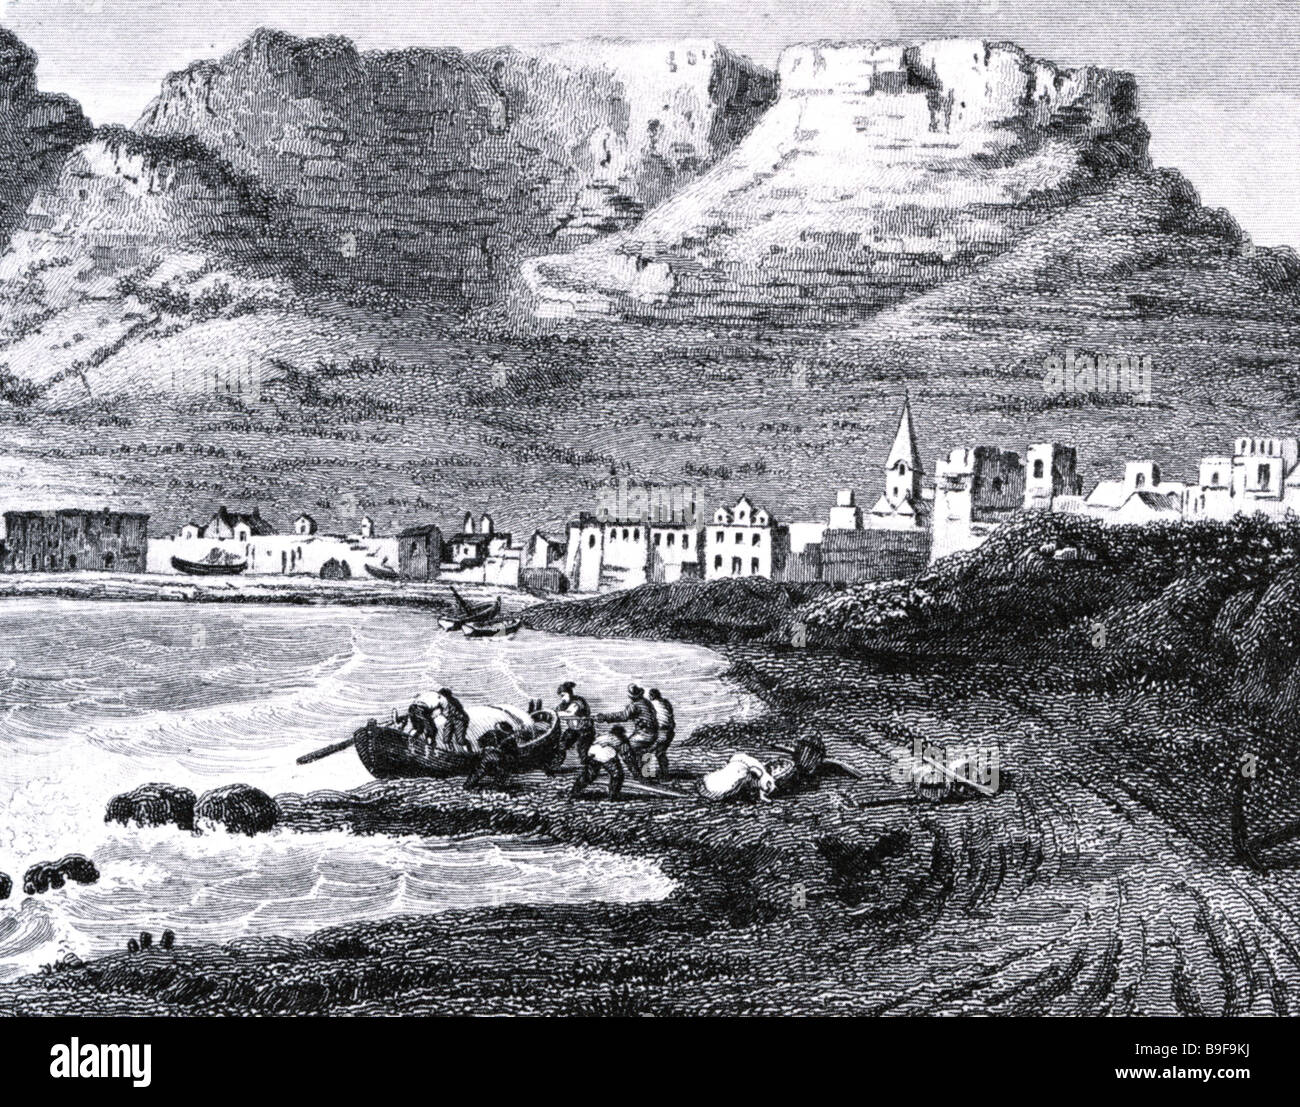 CAPE TOWN in an 1850 engraving Stock Photo